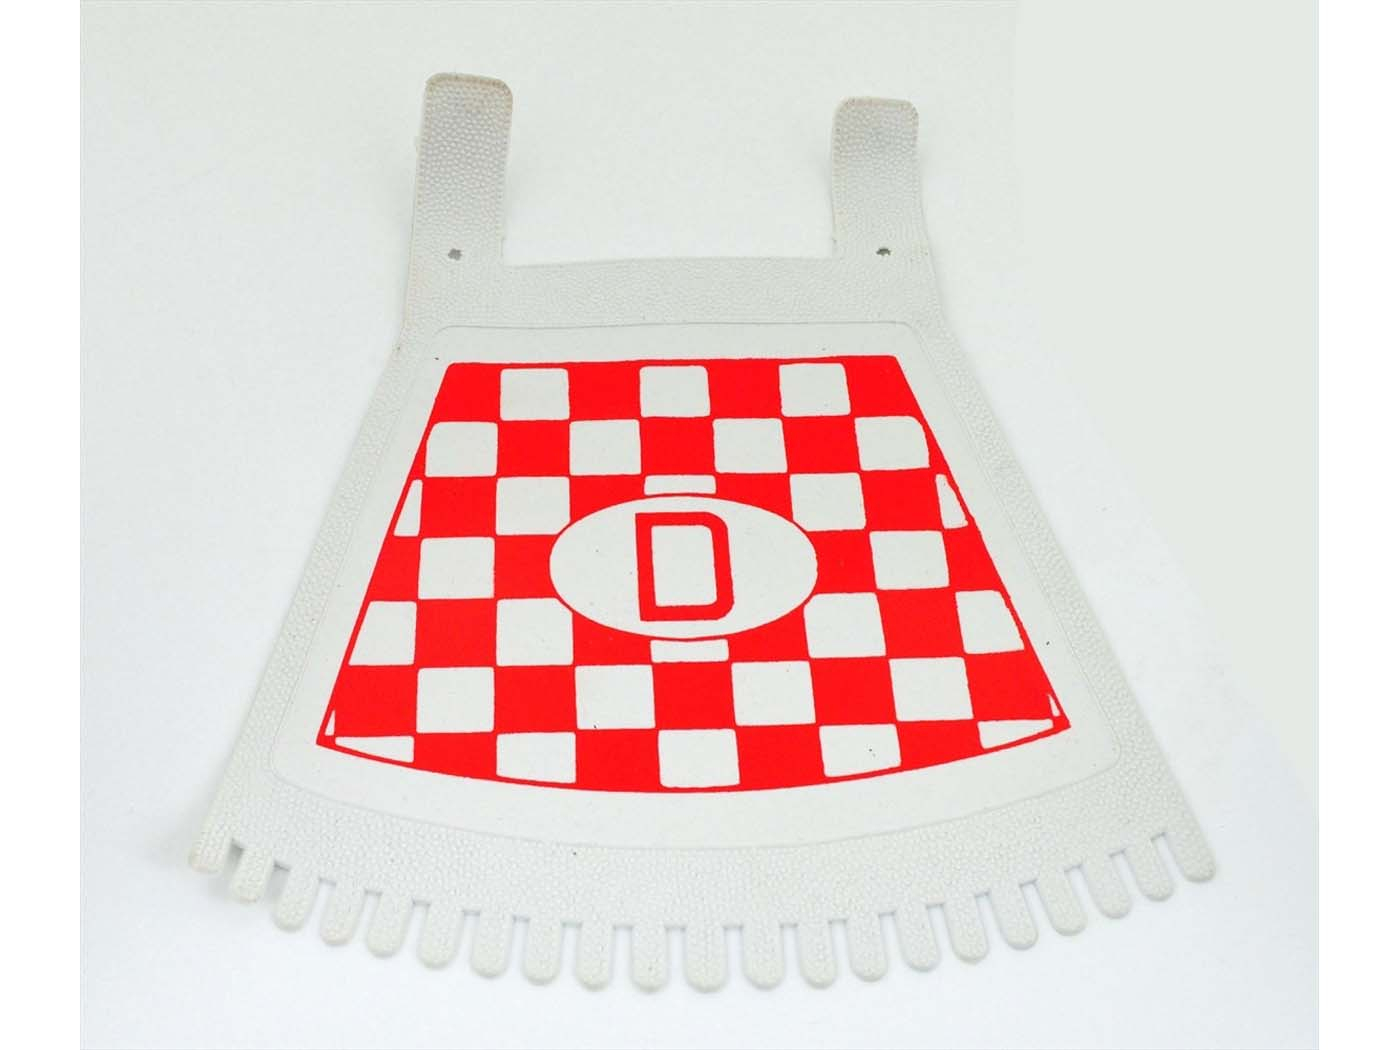 Splash Guard White Wide 200mm High Approx. 190mm Mounting Distance 110mm Color Red Checked For Bicycle, Moped, Moped, Mokick